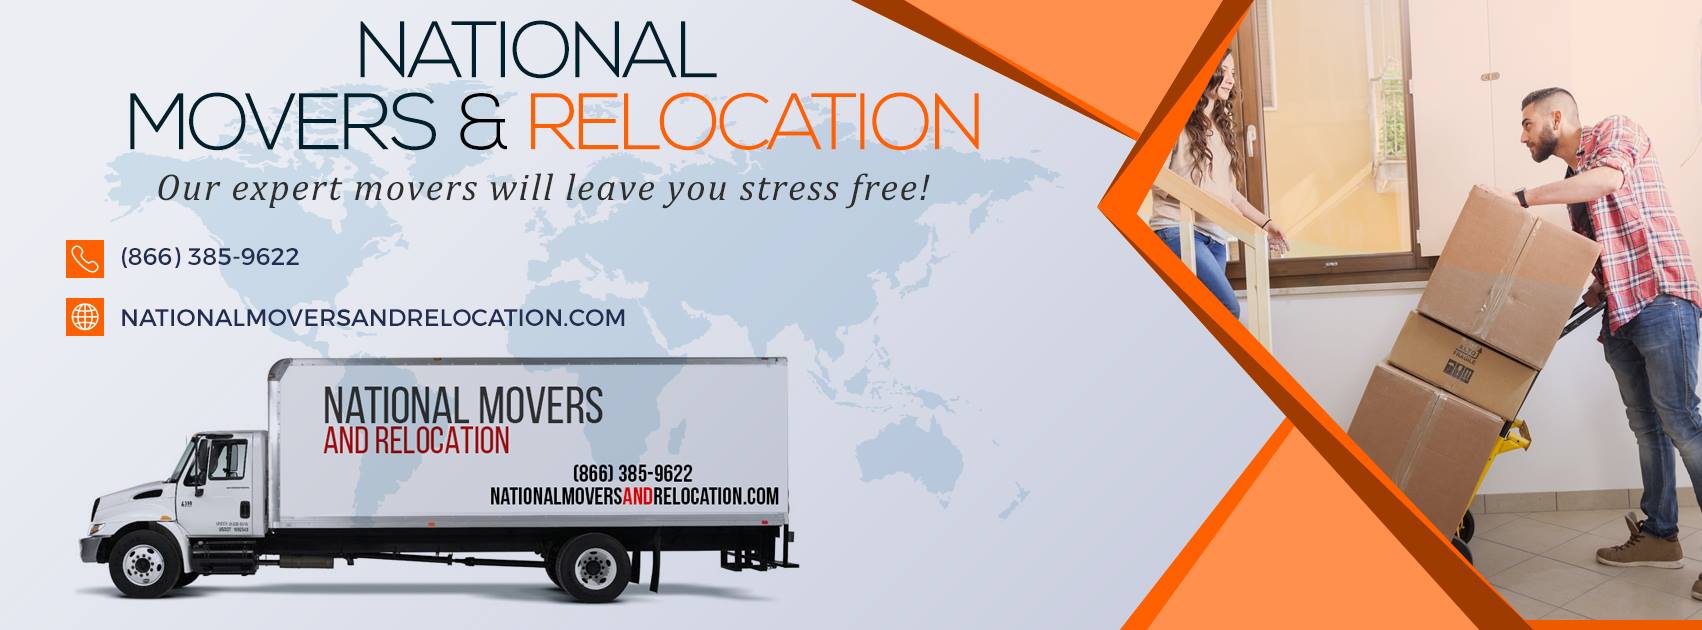 National Movers and Relocation